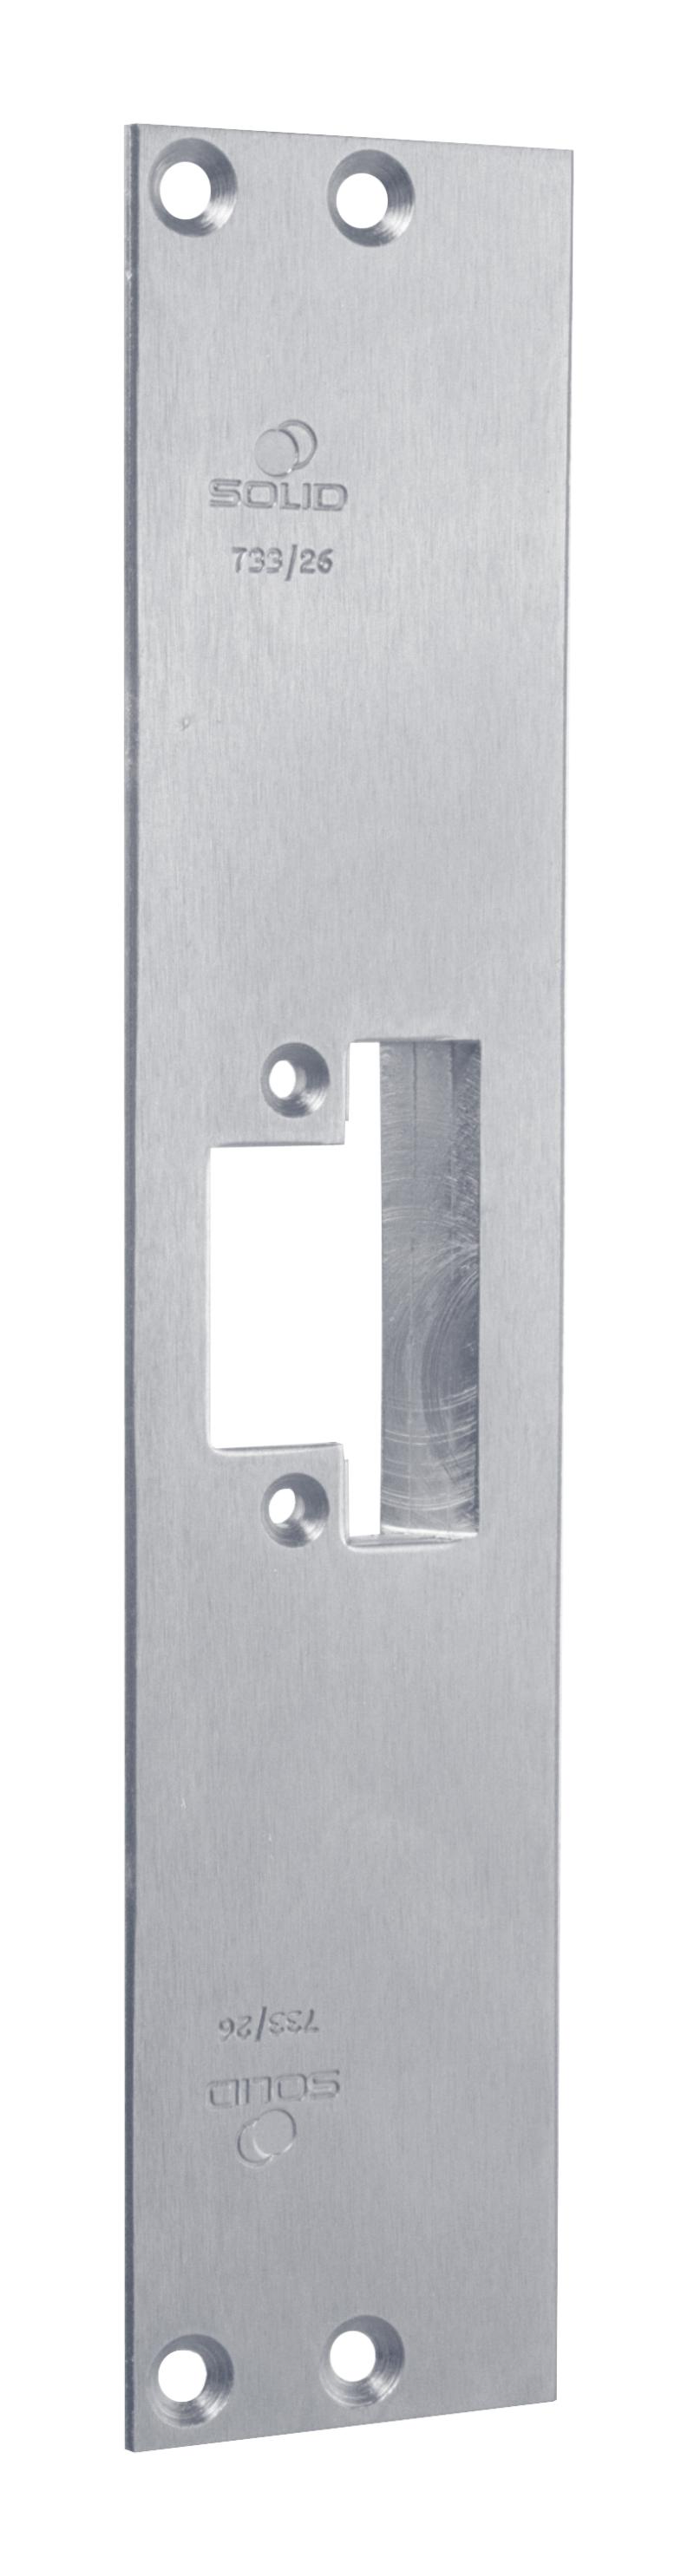 Solid post 733 - 17 mm, electric end plate (971352)